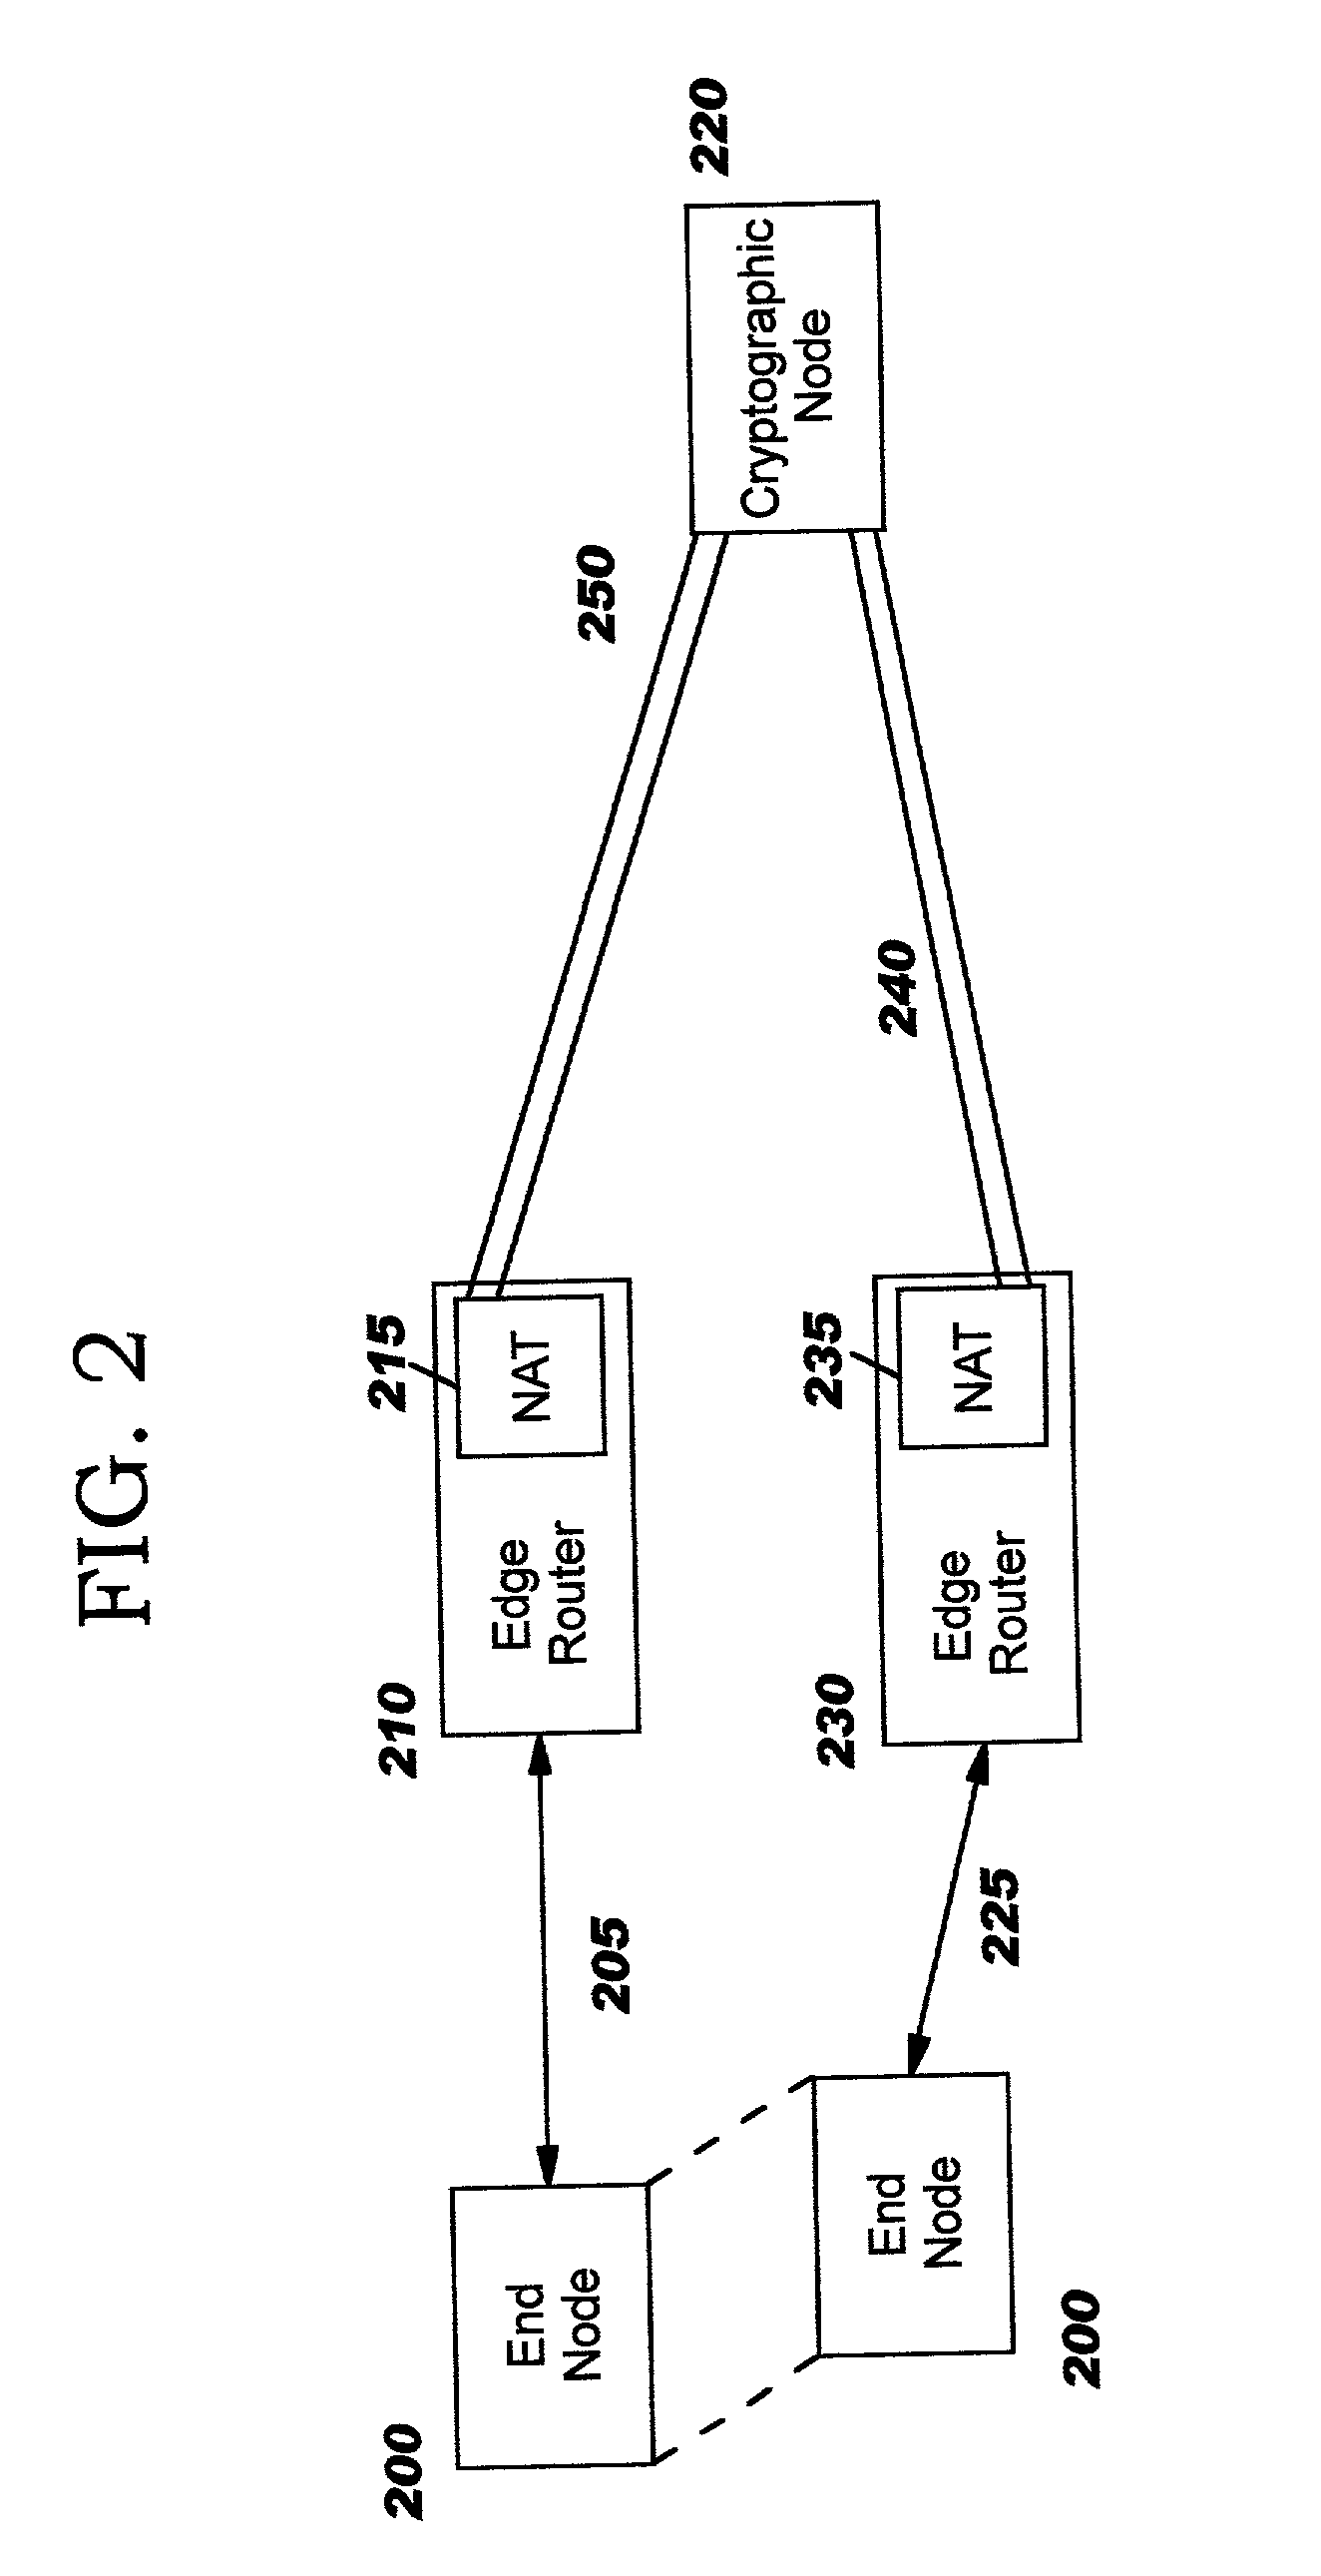 Enabling secure communication in a clustered or distributed architecture